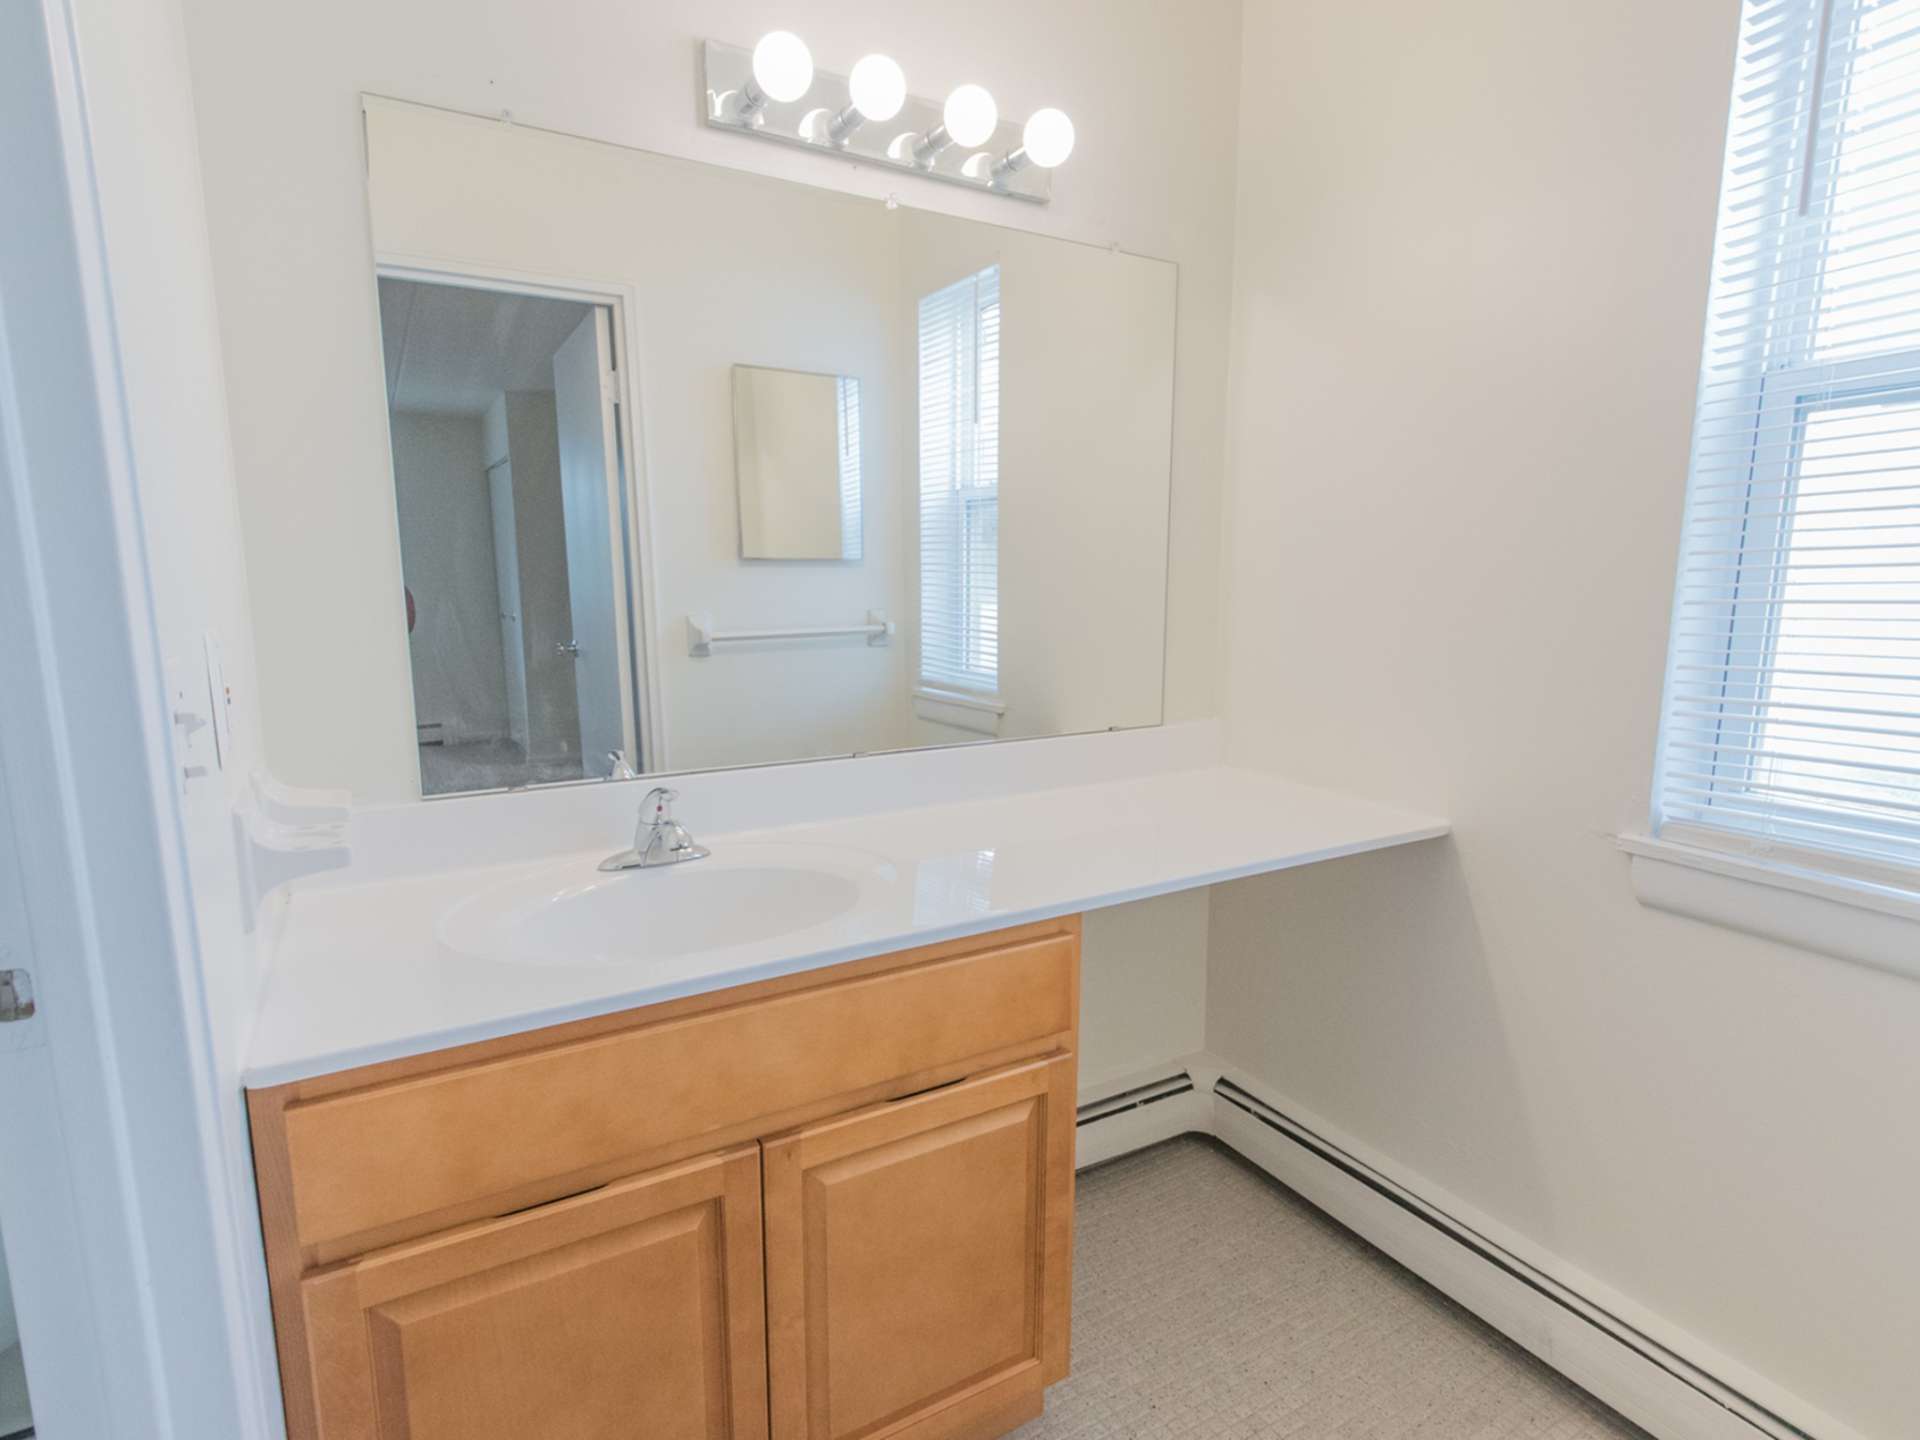 A bathroom with a large mirror, a window, and vanity lights.